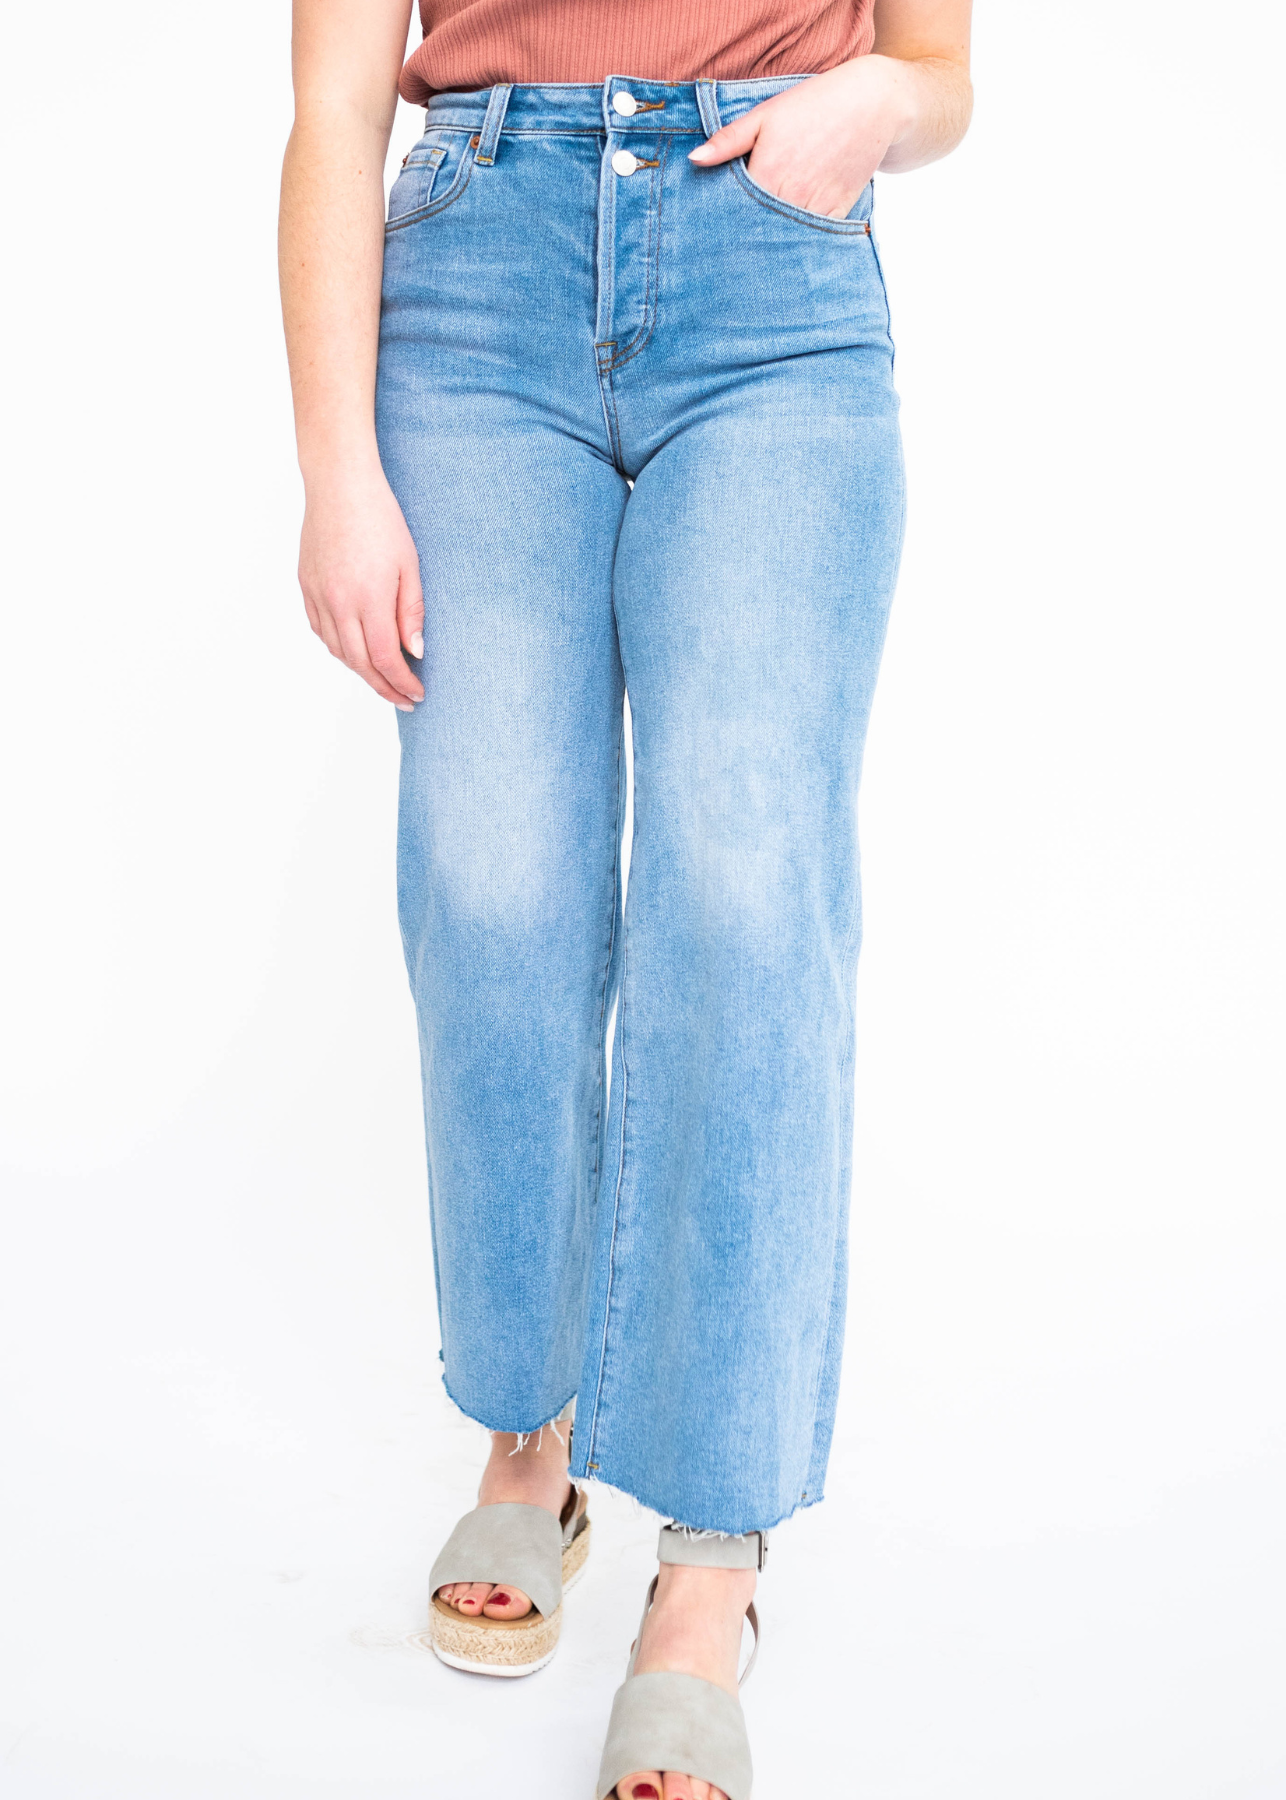 Wide leg light indigo jeans with faded marks on the legs